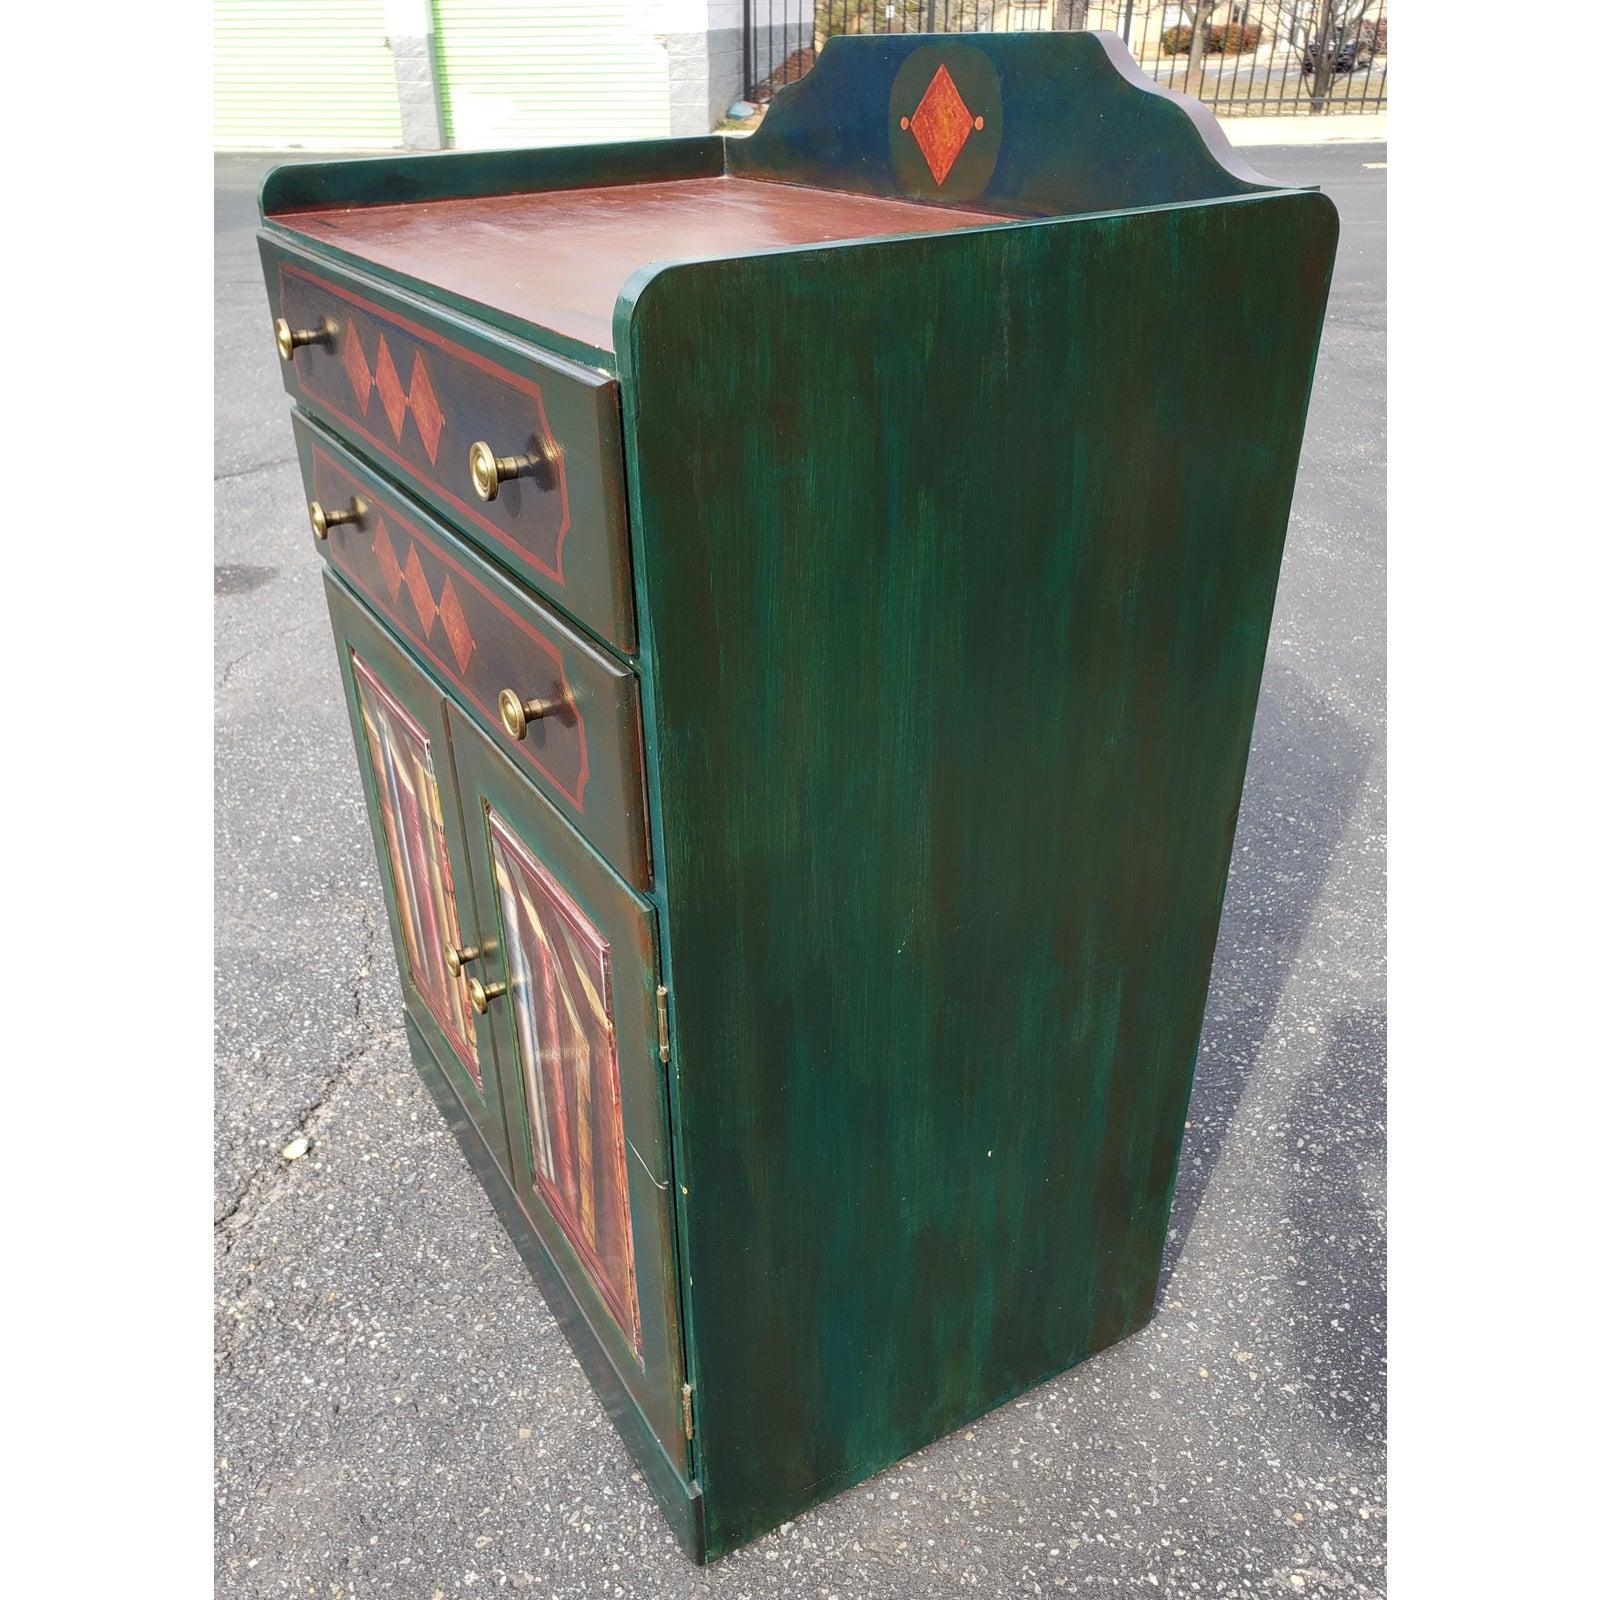 Vintage hand painted storage cabinet from S J Bailey and Sons Mascraft unfinished furniture. 
The cabinet features two large storage drawers with dovetail drawers and a large storage space below the drawers. The cabinet is made out of light pined